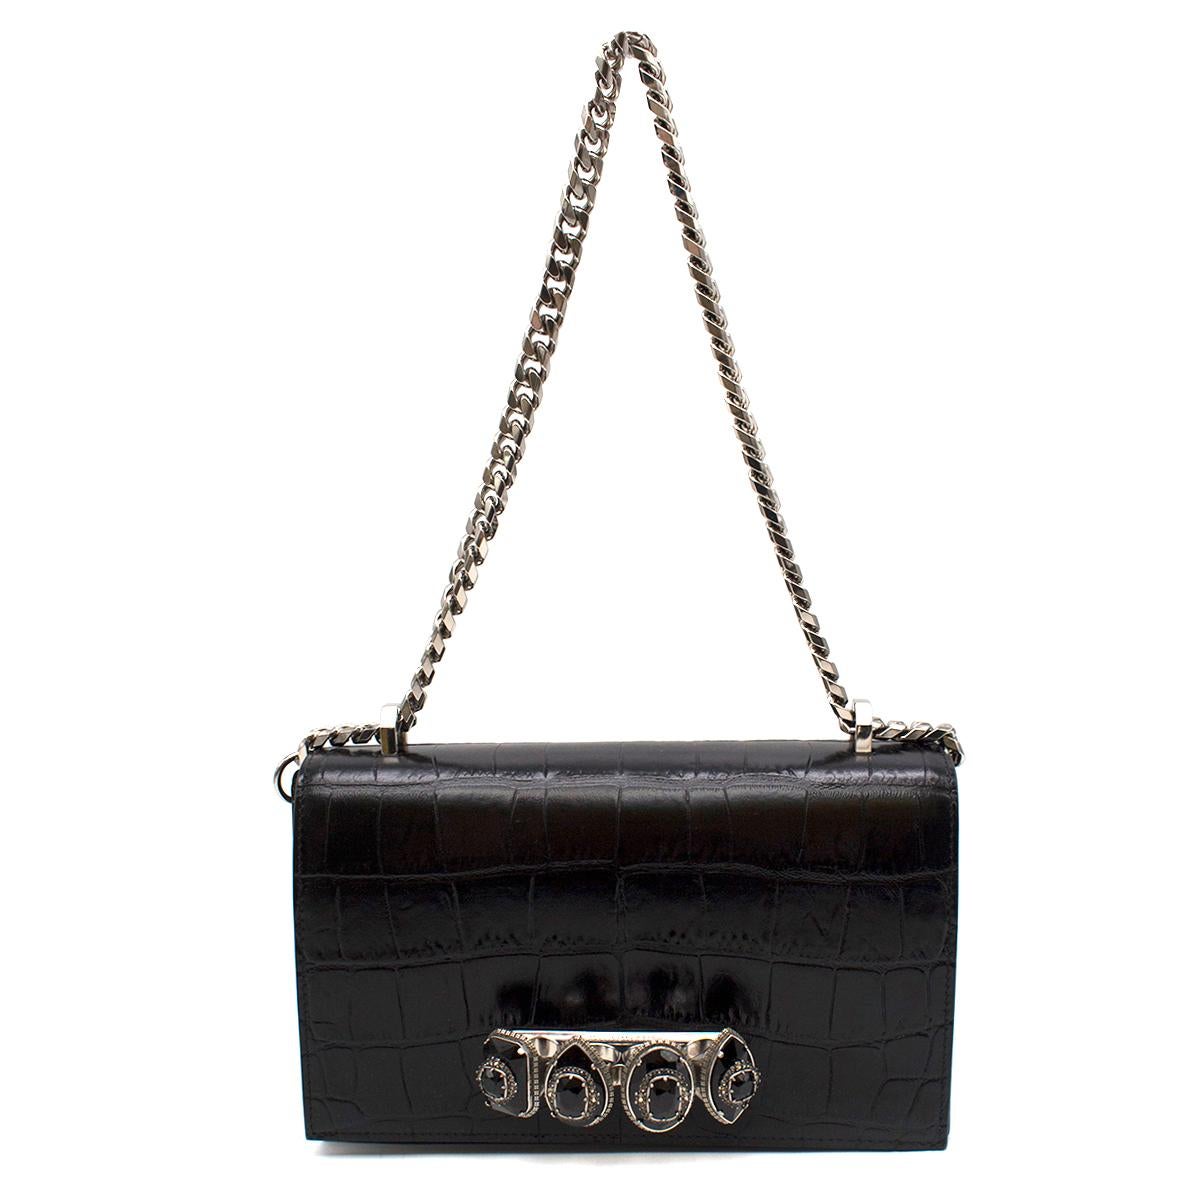 Alexander McQueen jewel handle cross-body bag

-Rich embroidery, jewel tones and ornate embellishing. 
-Crafted from croc-embossed leather. 
-Black jewel handle cross-body bag features a chain shoulder strap
-A foldover top with magnetic closure
-An